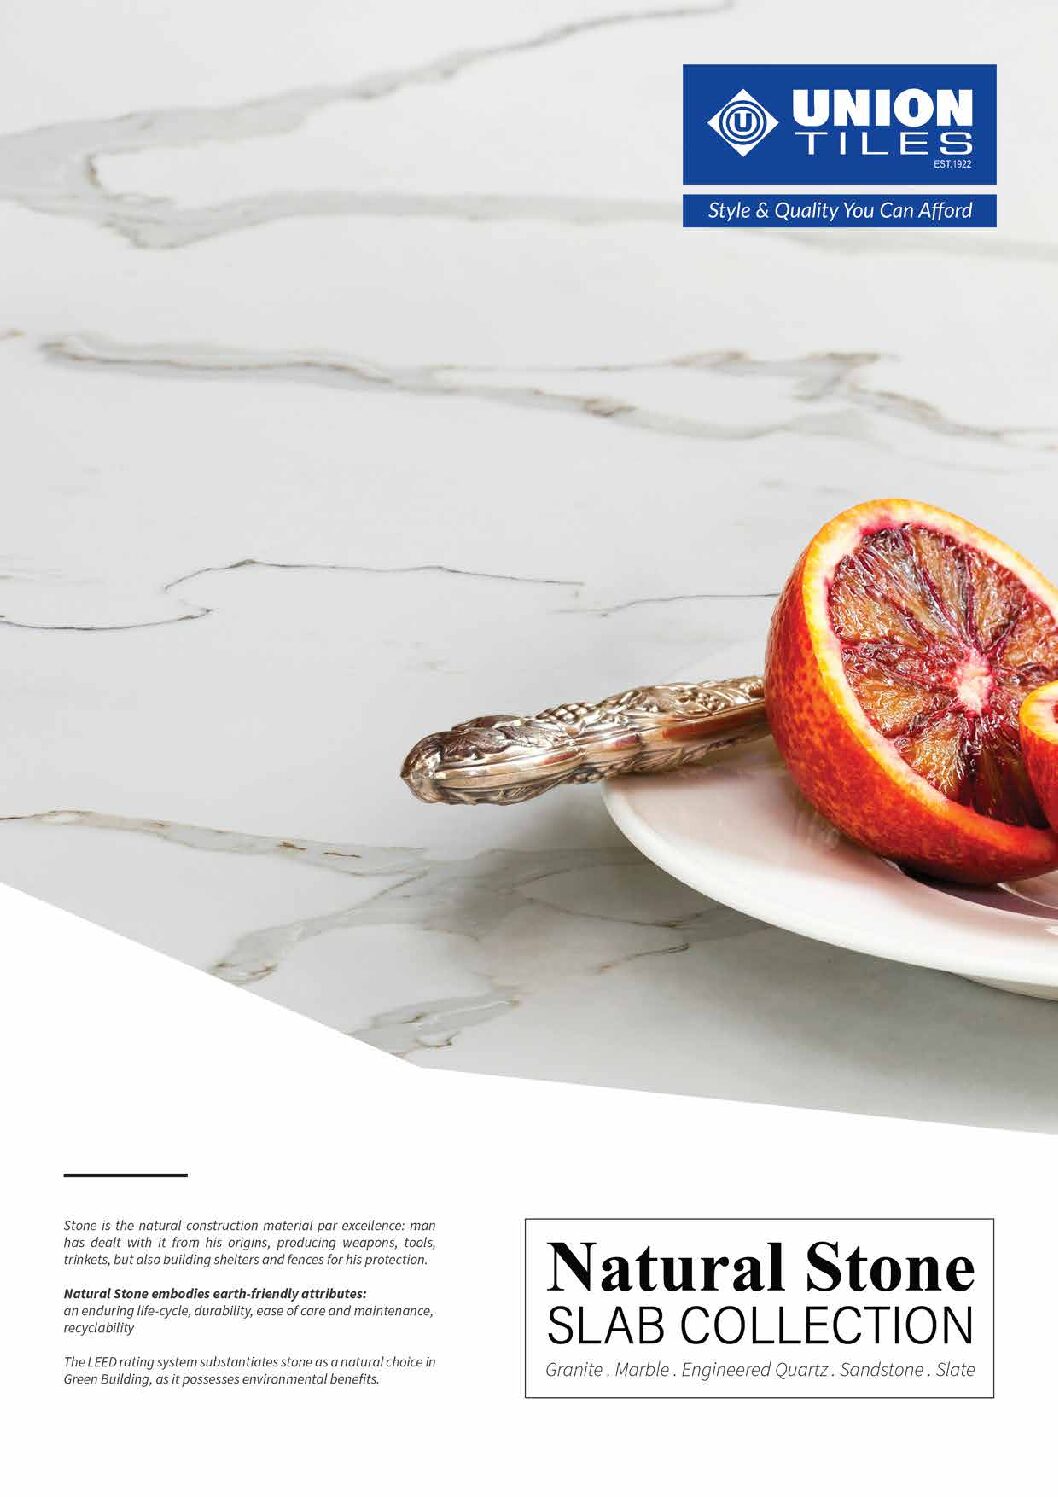 Venice Stone Natural Stone Slab Collection